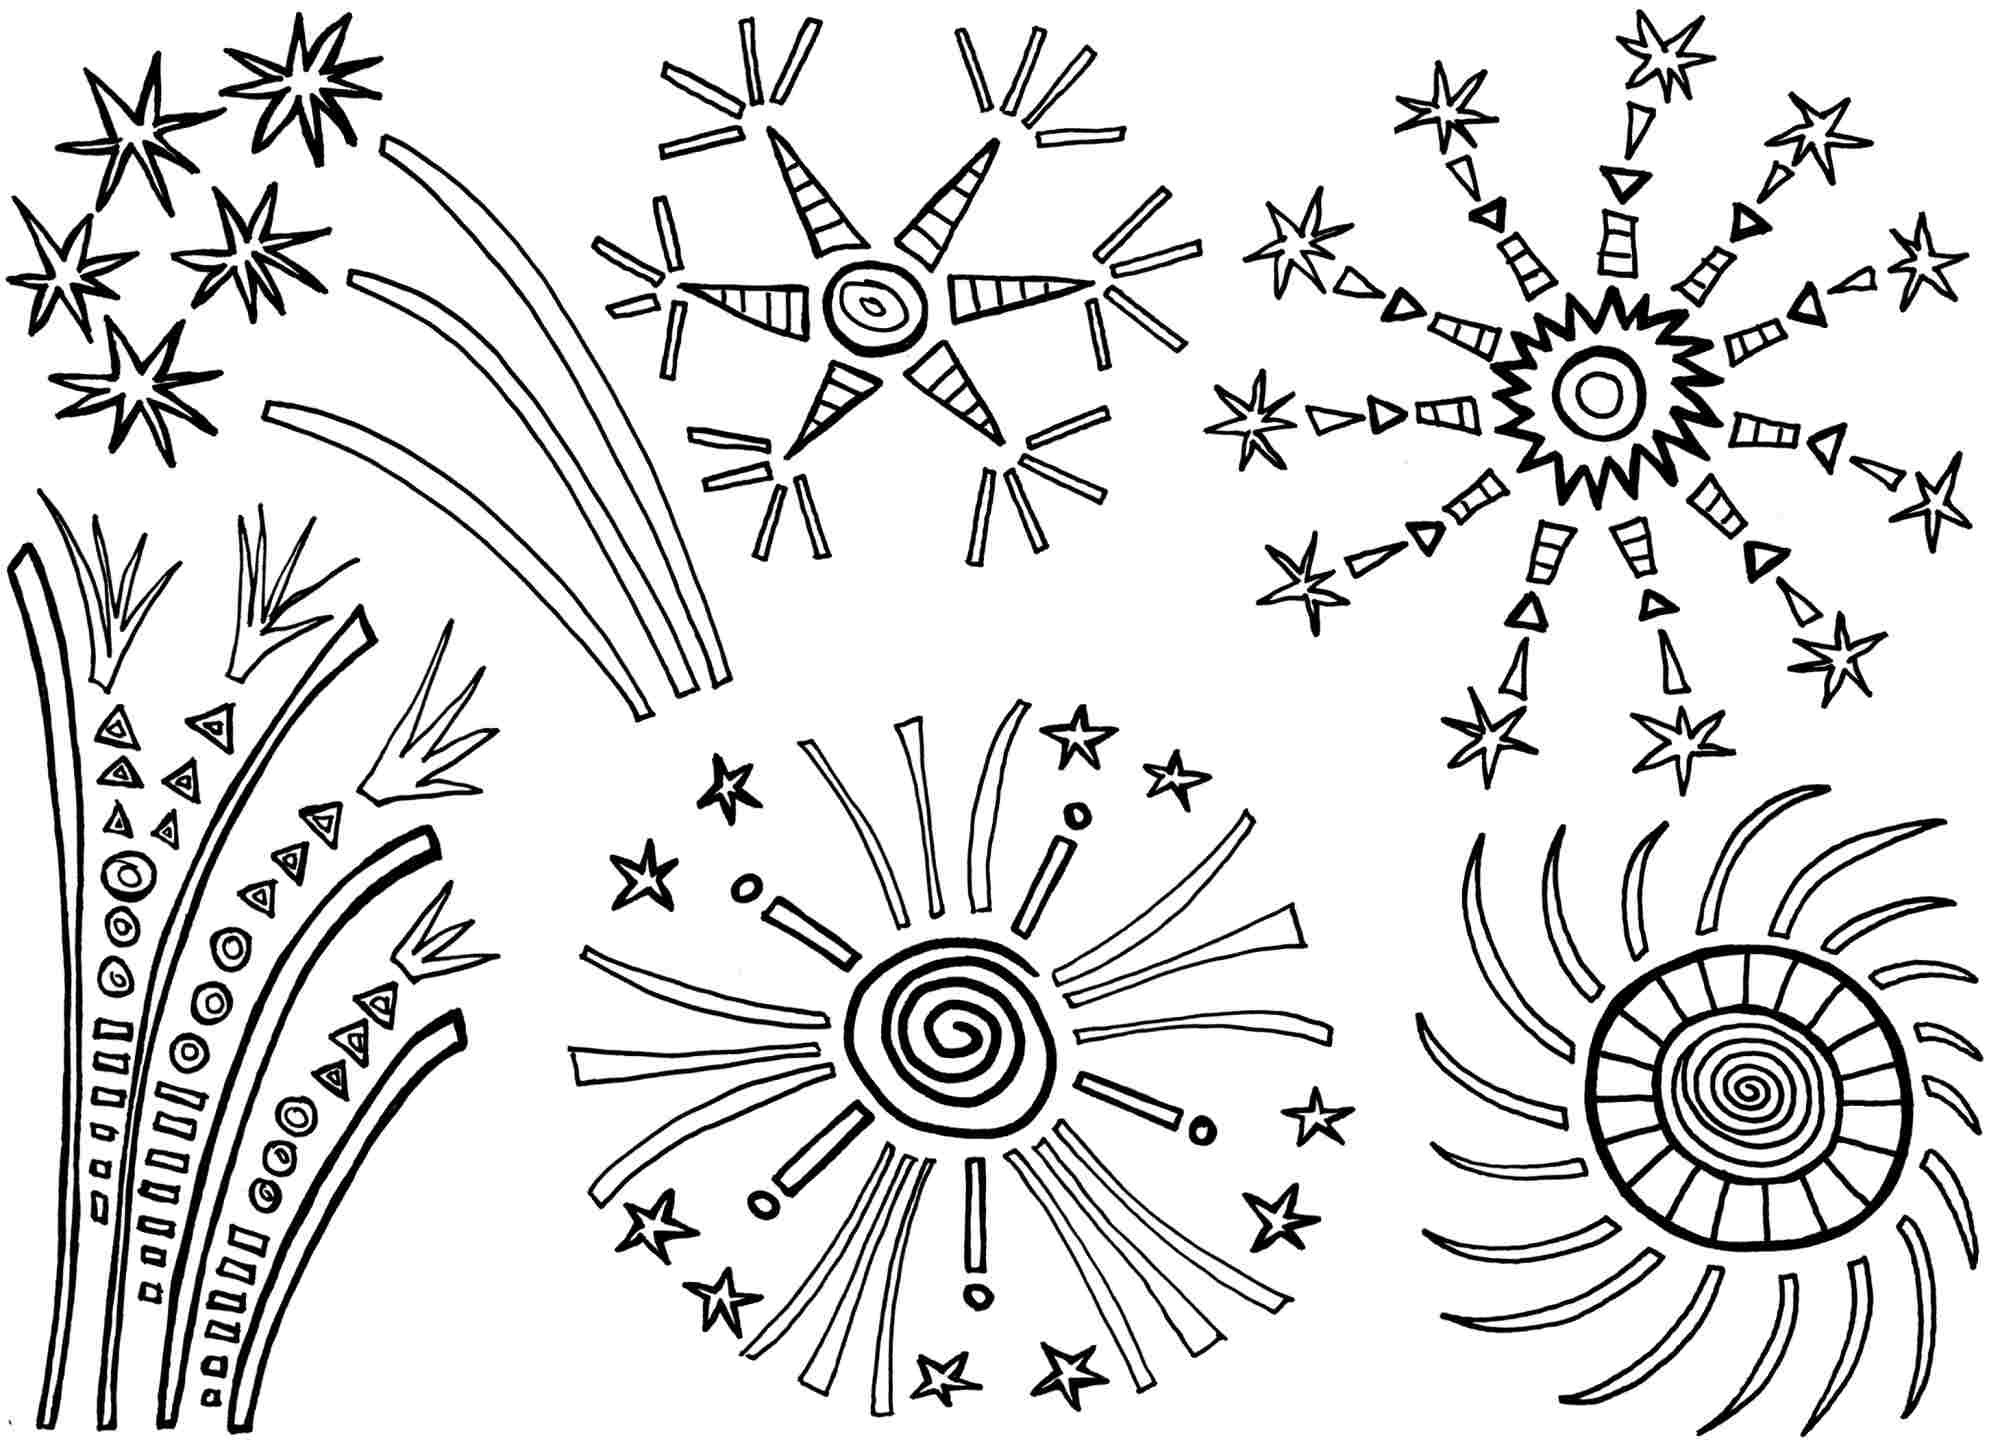 Firework Coloring Pages
 Free Printable Fireworks Coloring Pages For Kids